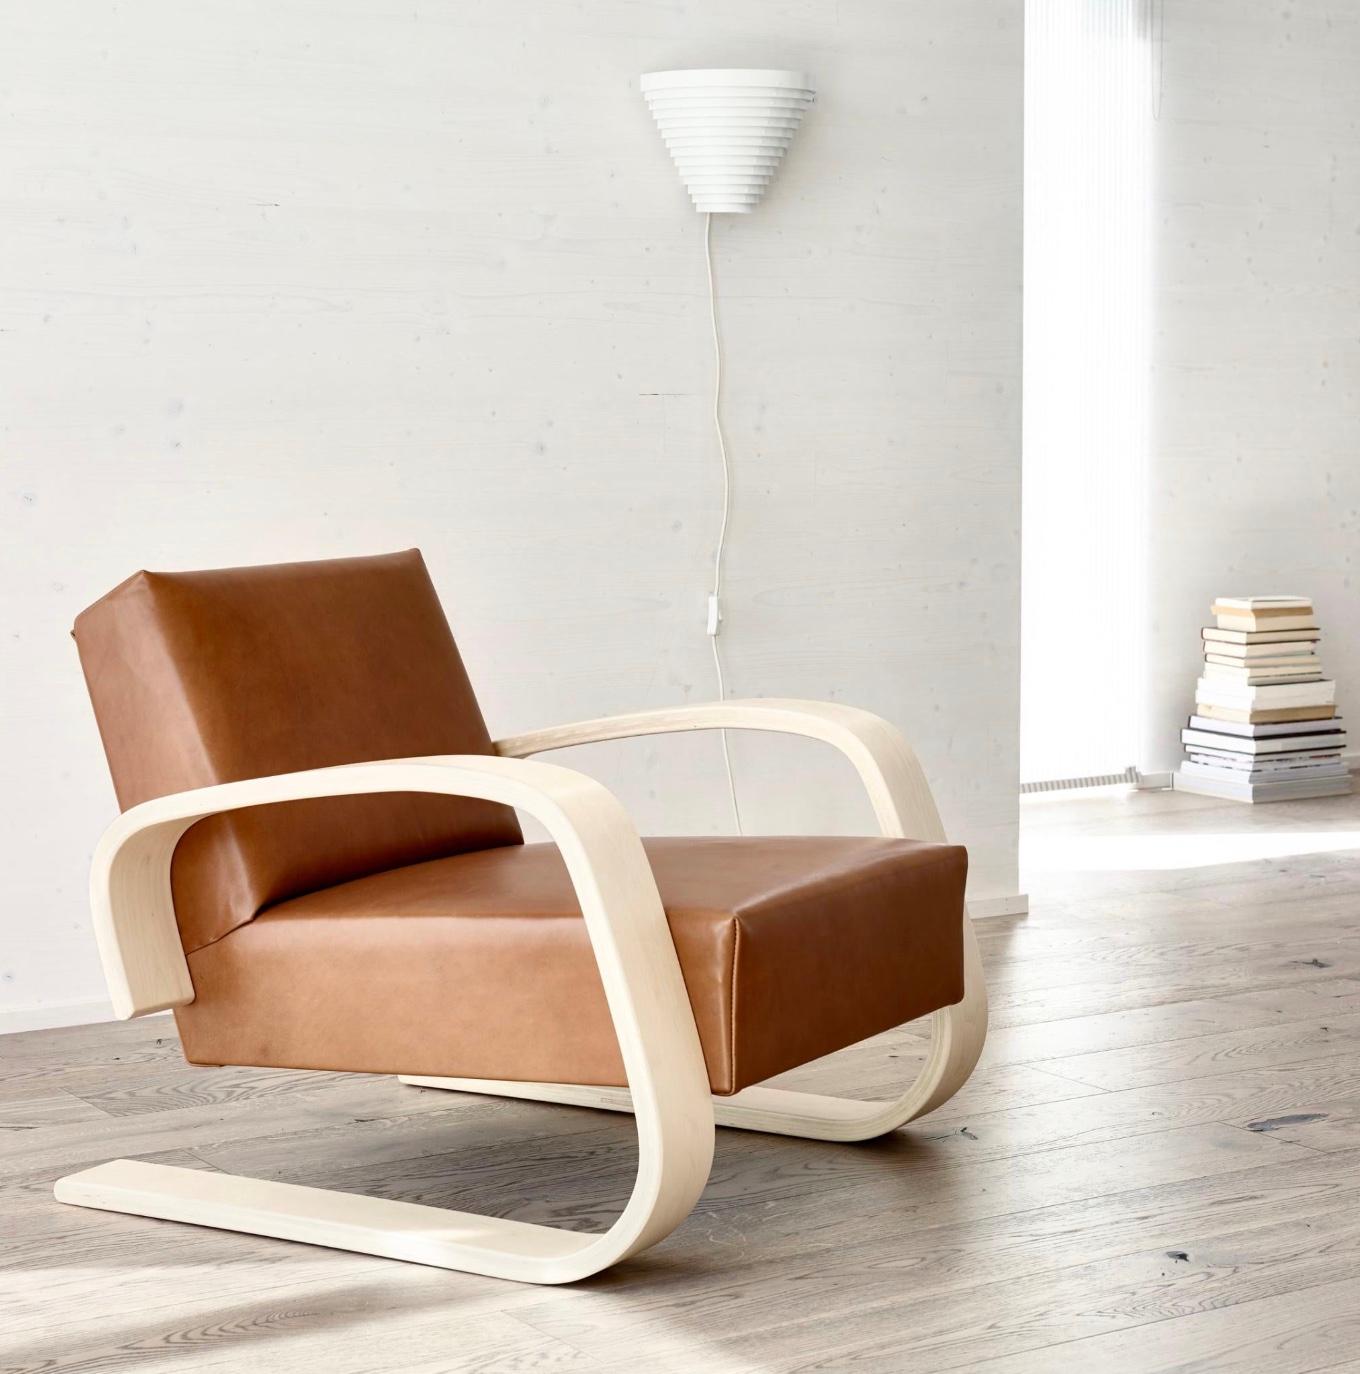 Alvar Aalto pair of 400 ‘Tank’ armchair for Artek. Designed in 1936. New, current production. Please note: the price is for 2 chairs with Artek Zebra upholstery and natural lacquered armrests. Other configurations on request.

As voluminous as it